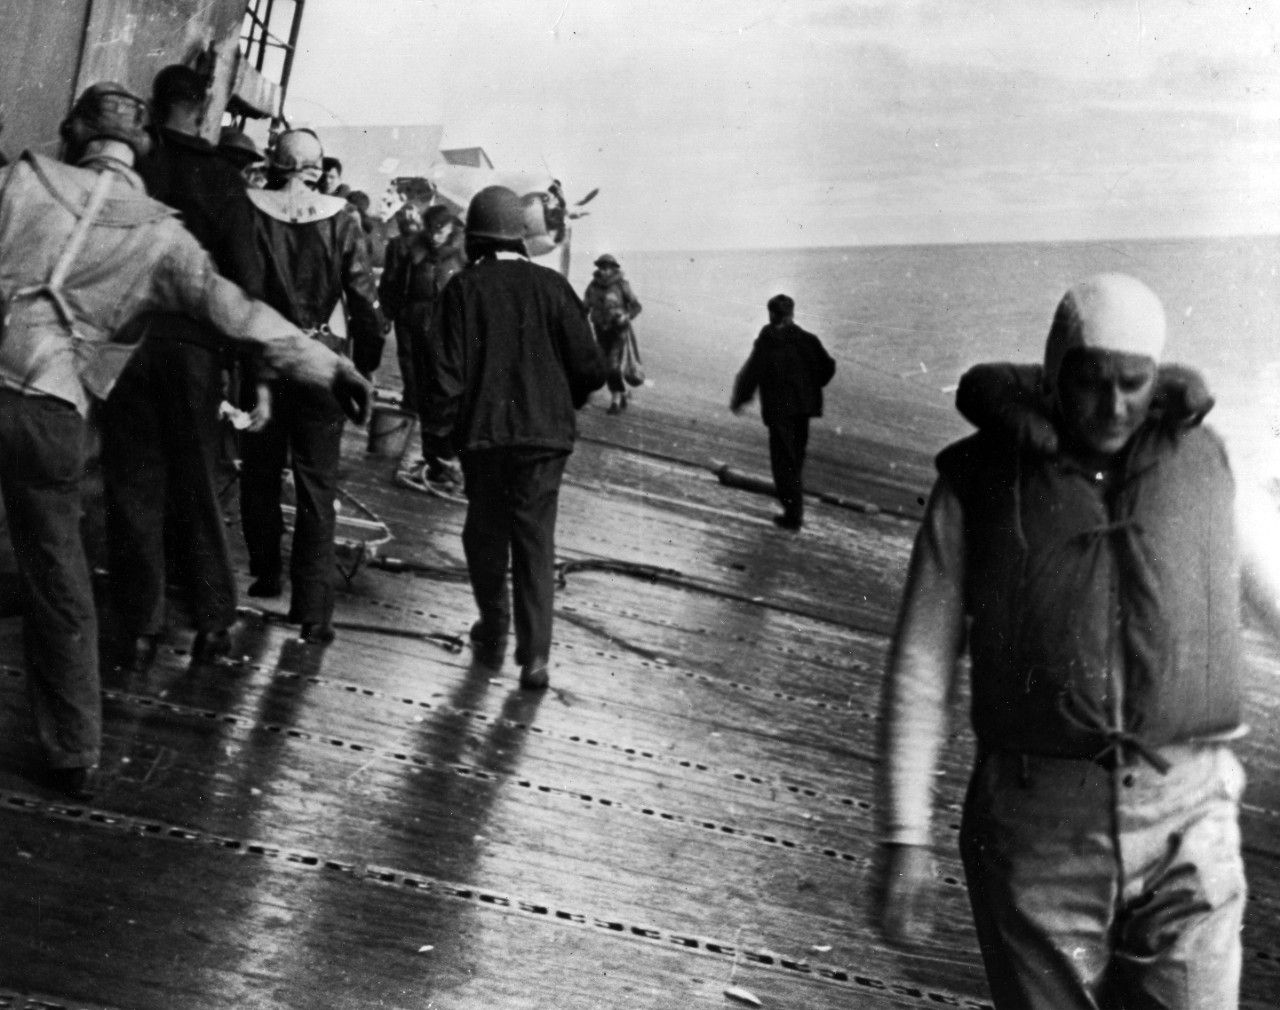 Photo #: 80-G-14384  Battle of Midway, June 1942